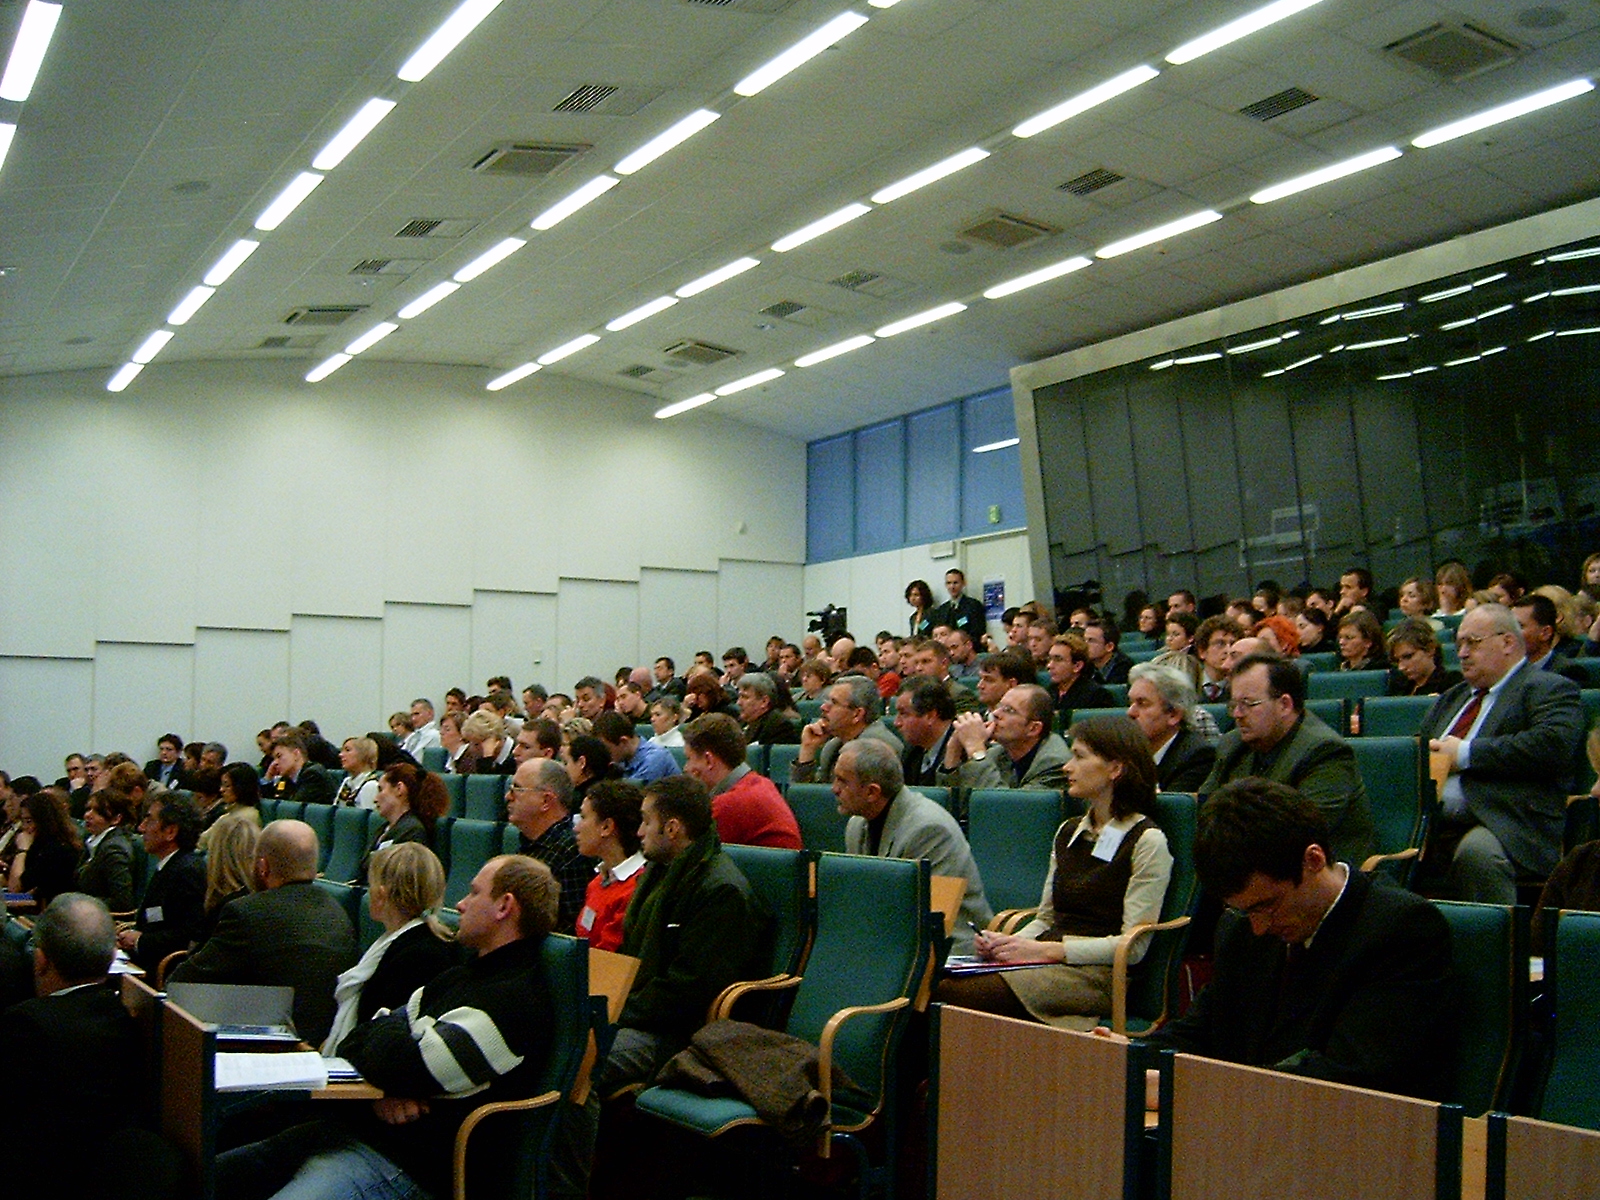 File:Cracow University of Economics - Lecture Room 9.JPG - Wikimedia Commons